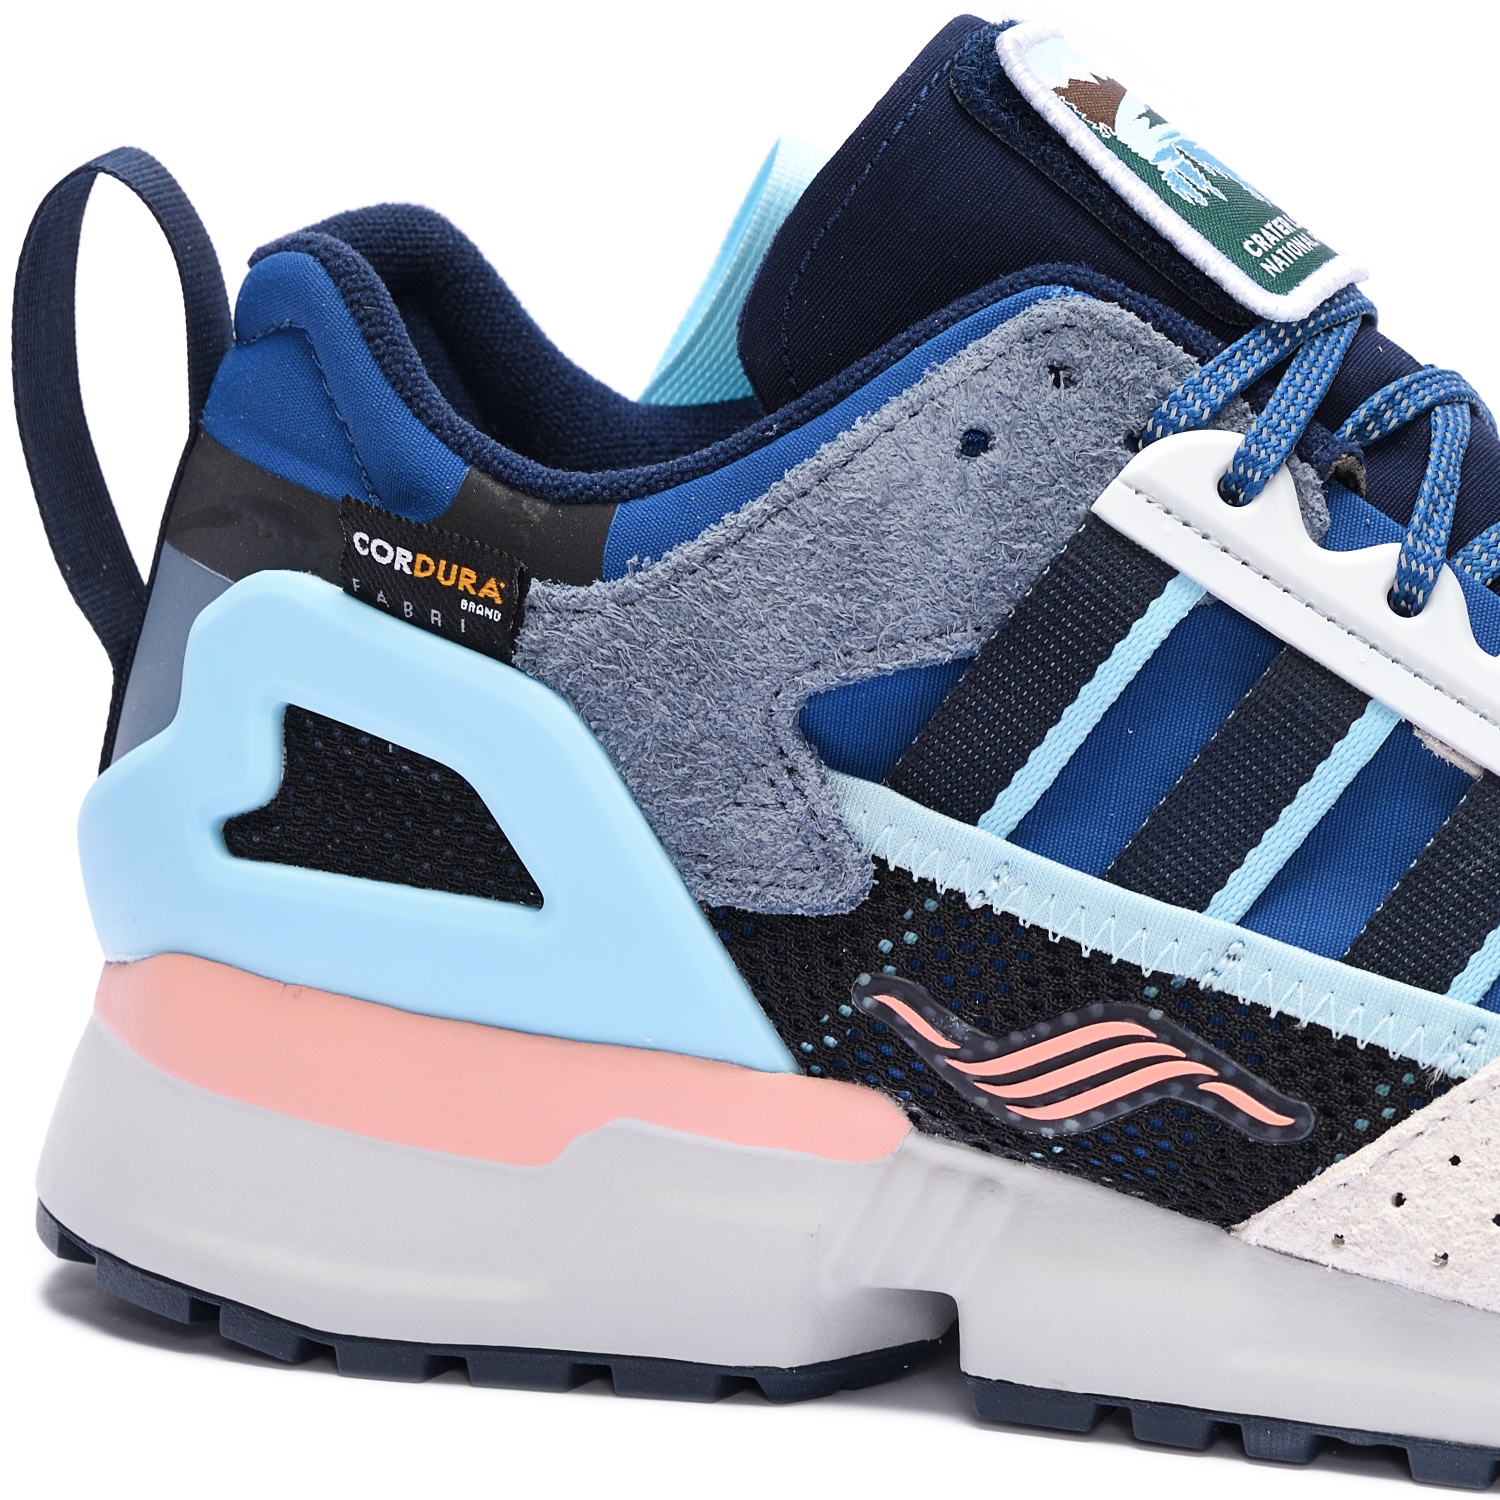 adidas x National Park Foundation ZX 10000C - Crater Lake National Park